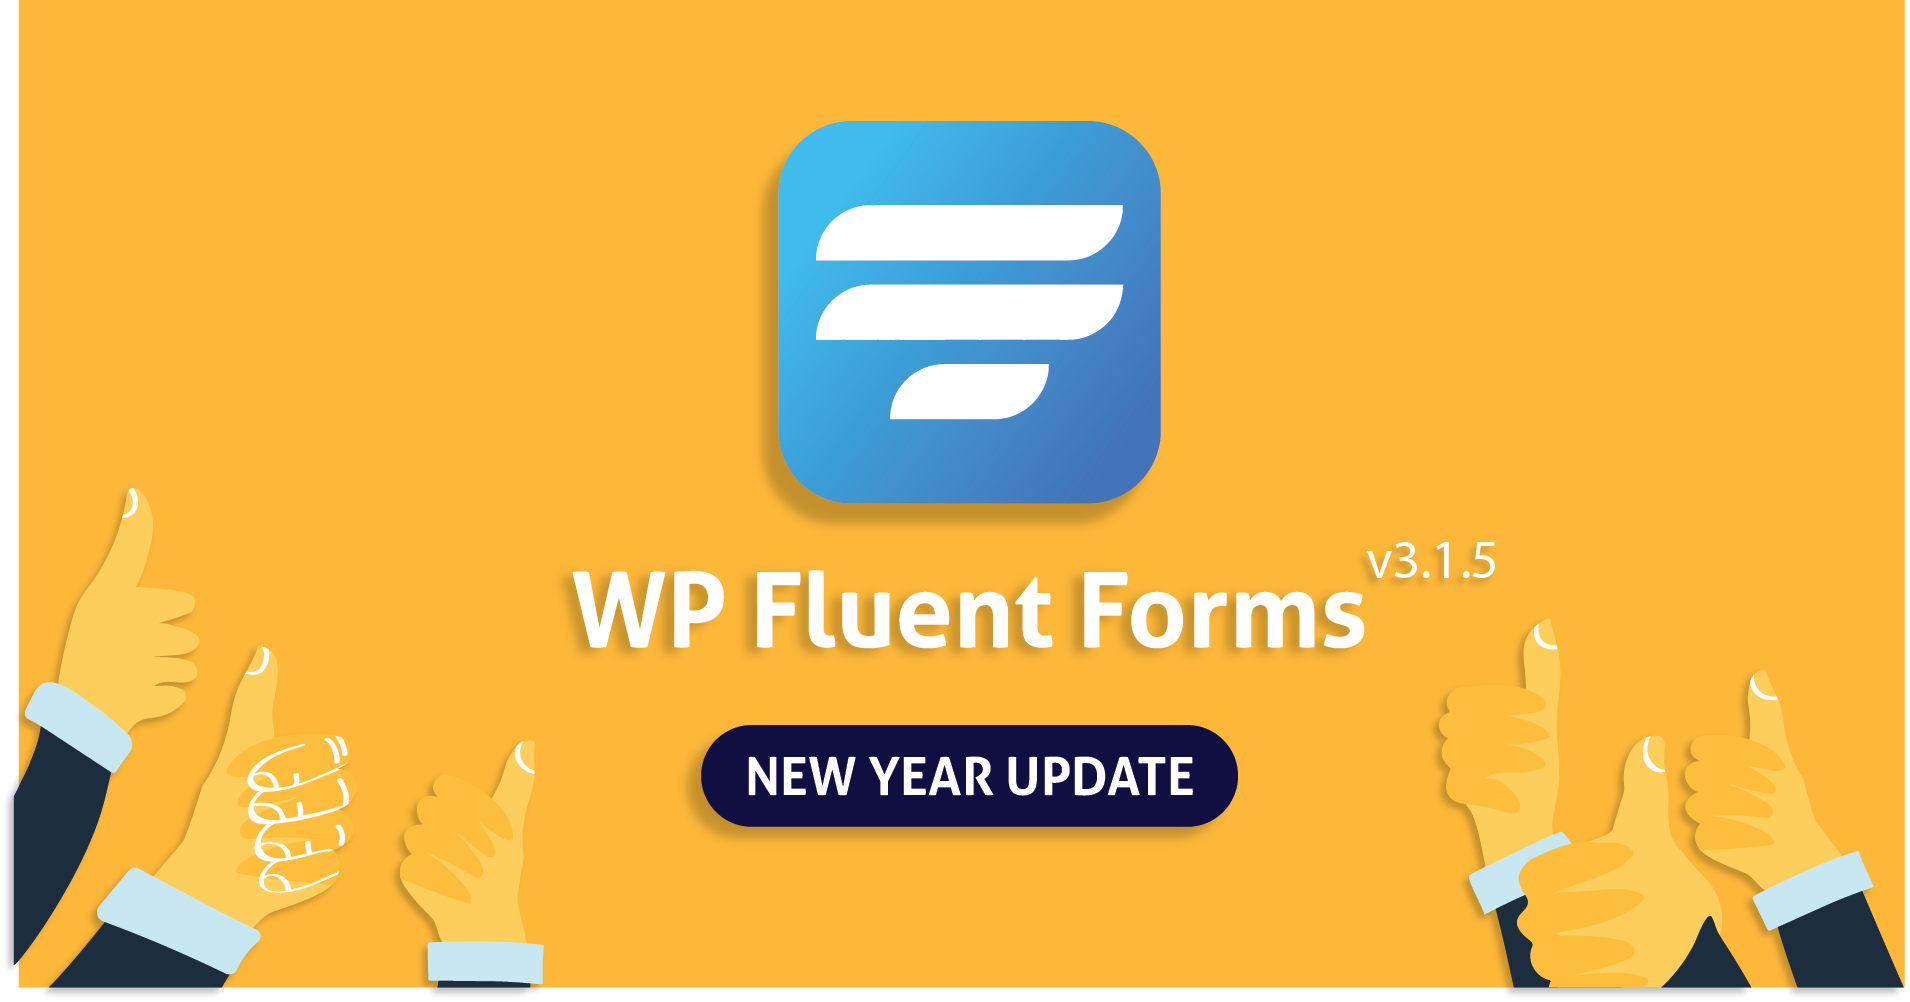 Fluent forms. Fluent forms Pro. Only new forms